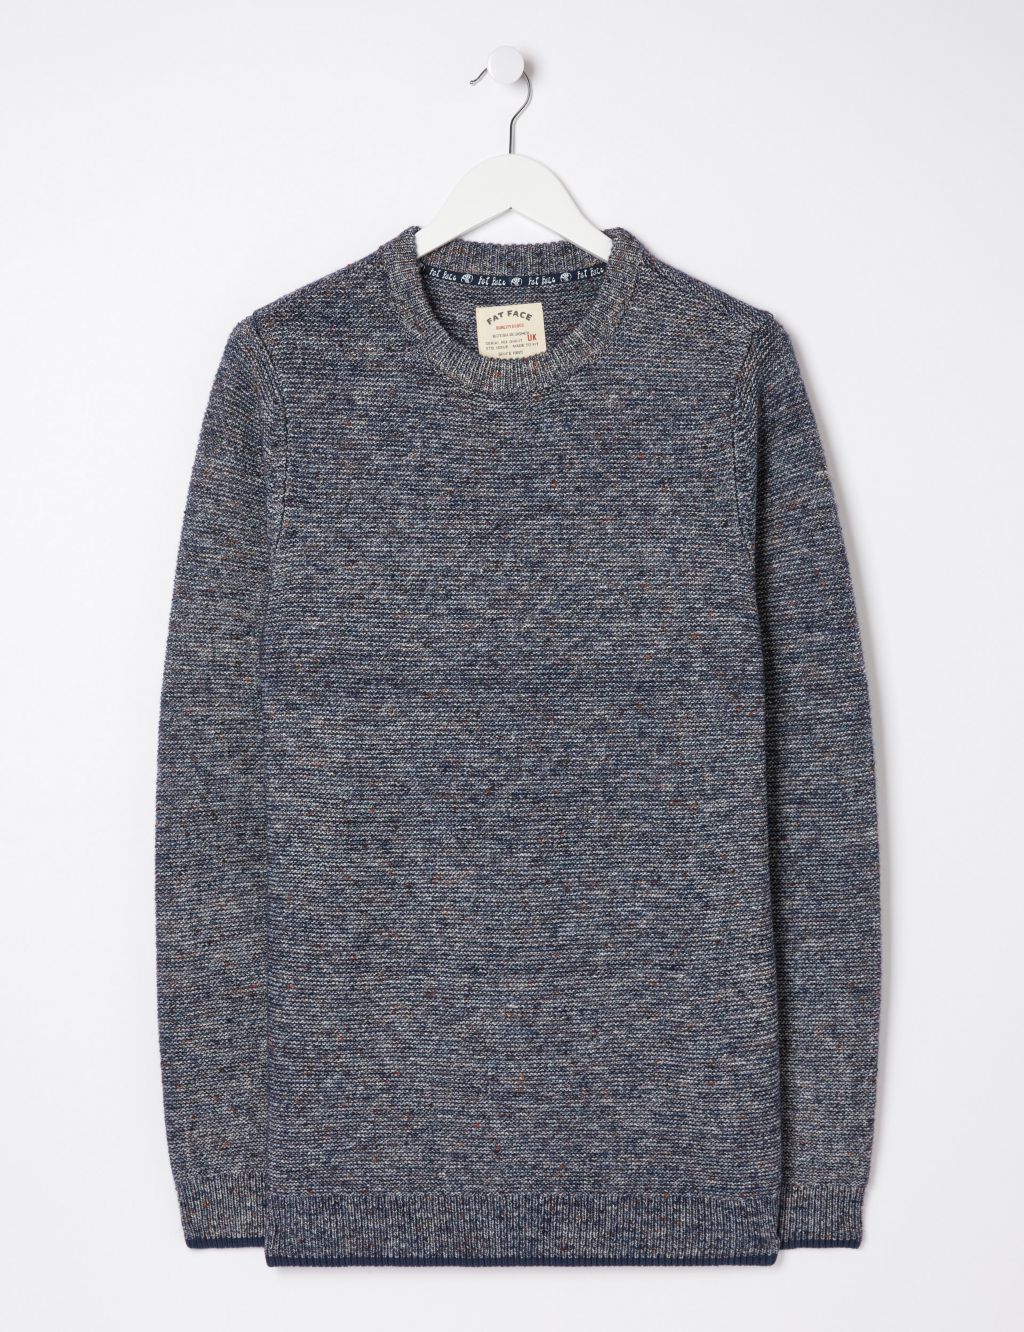 Cotton Rich Ribbed Crew Neck Jumper image 2